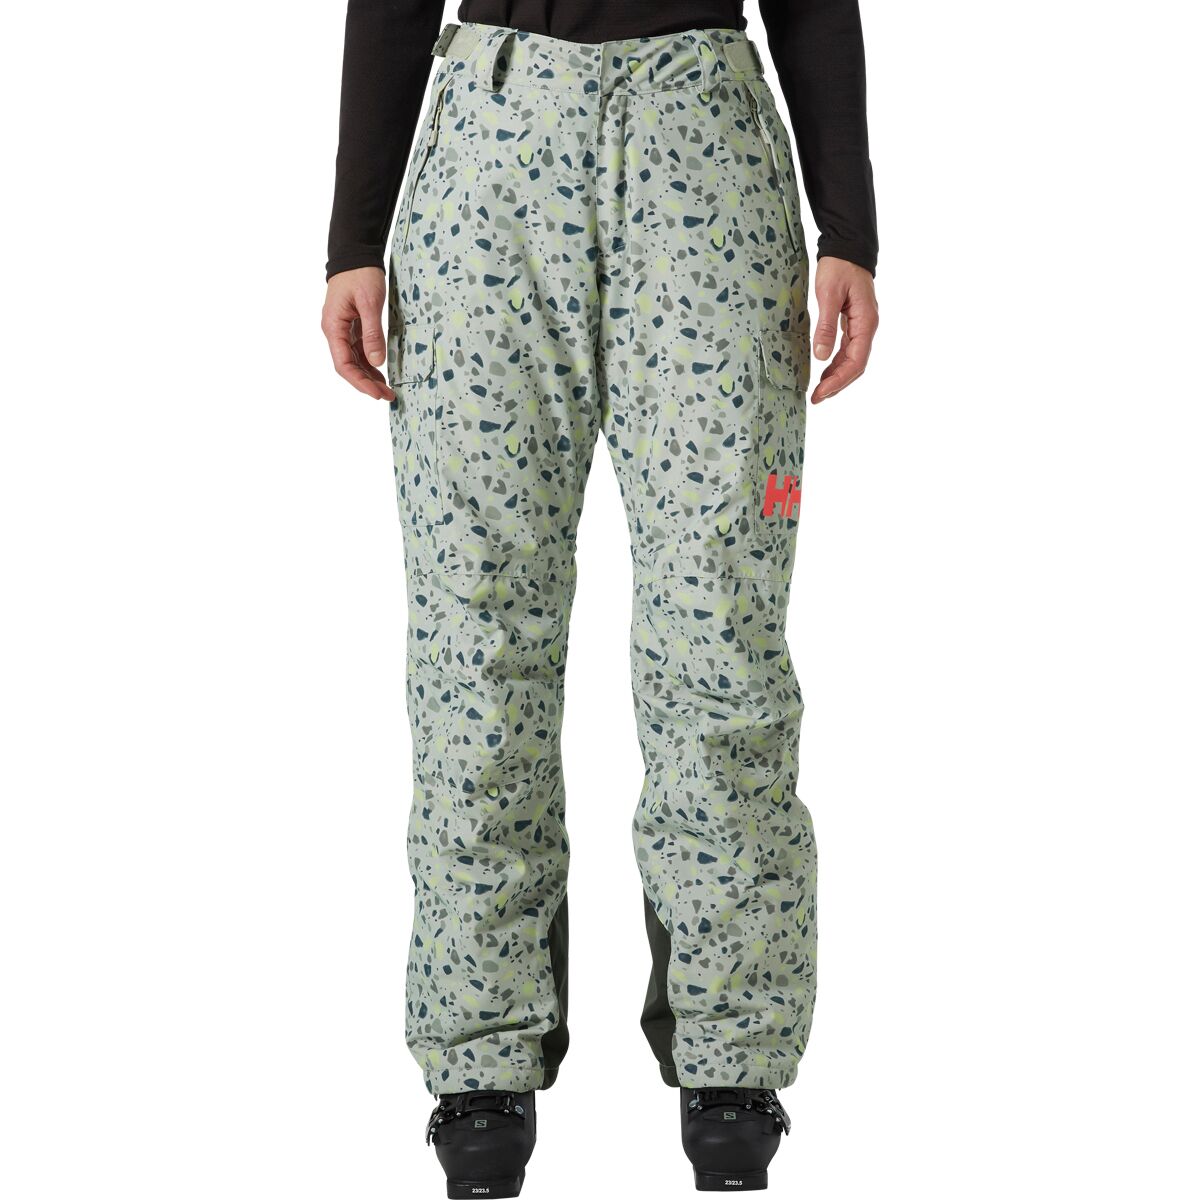 Switch Cargo Insulated Pant - Women